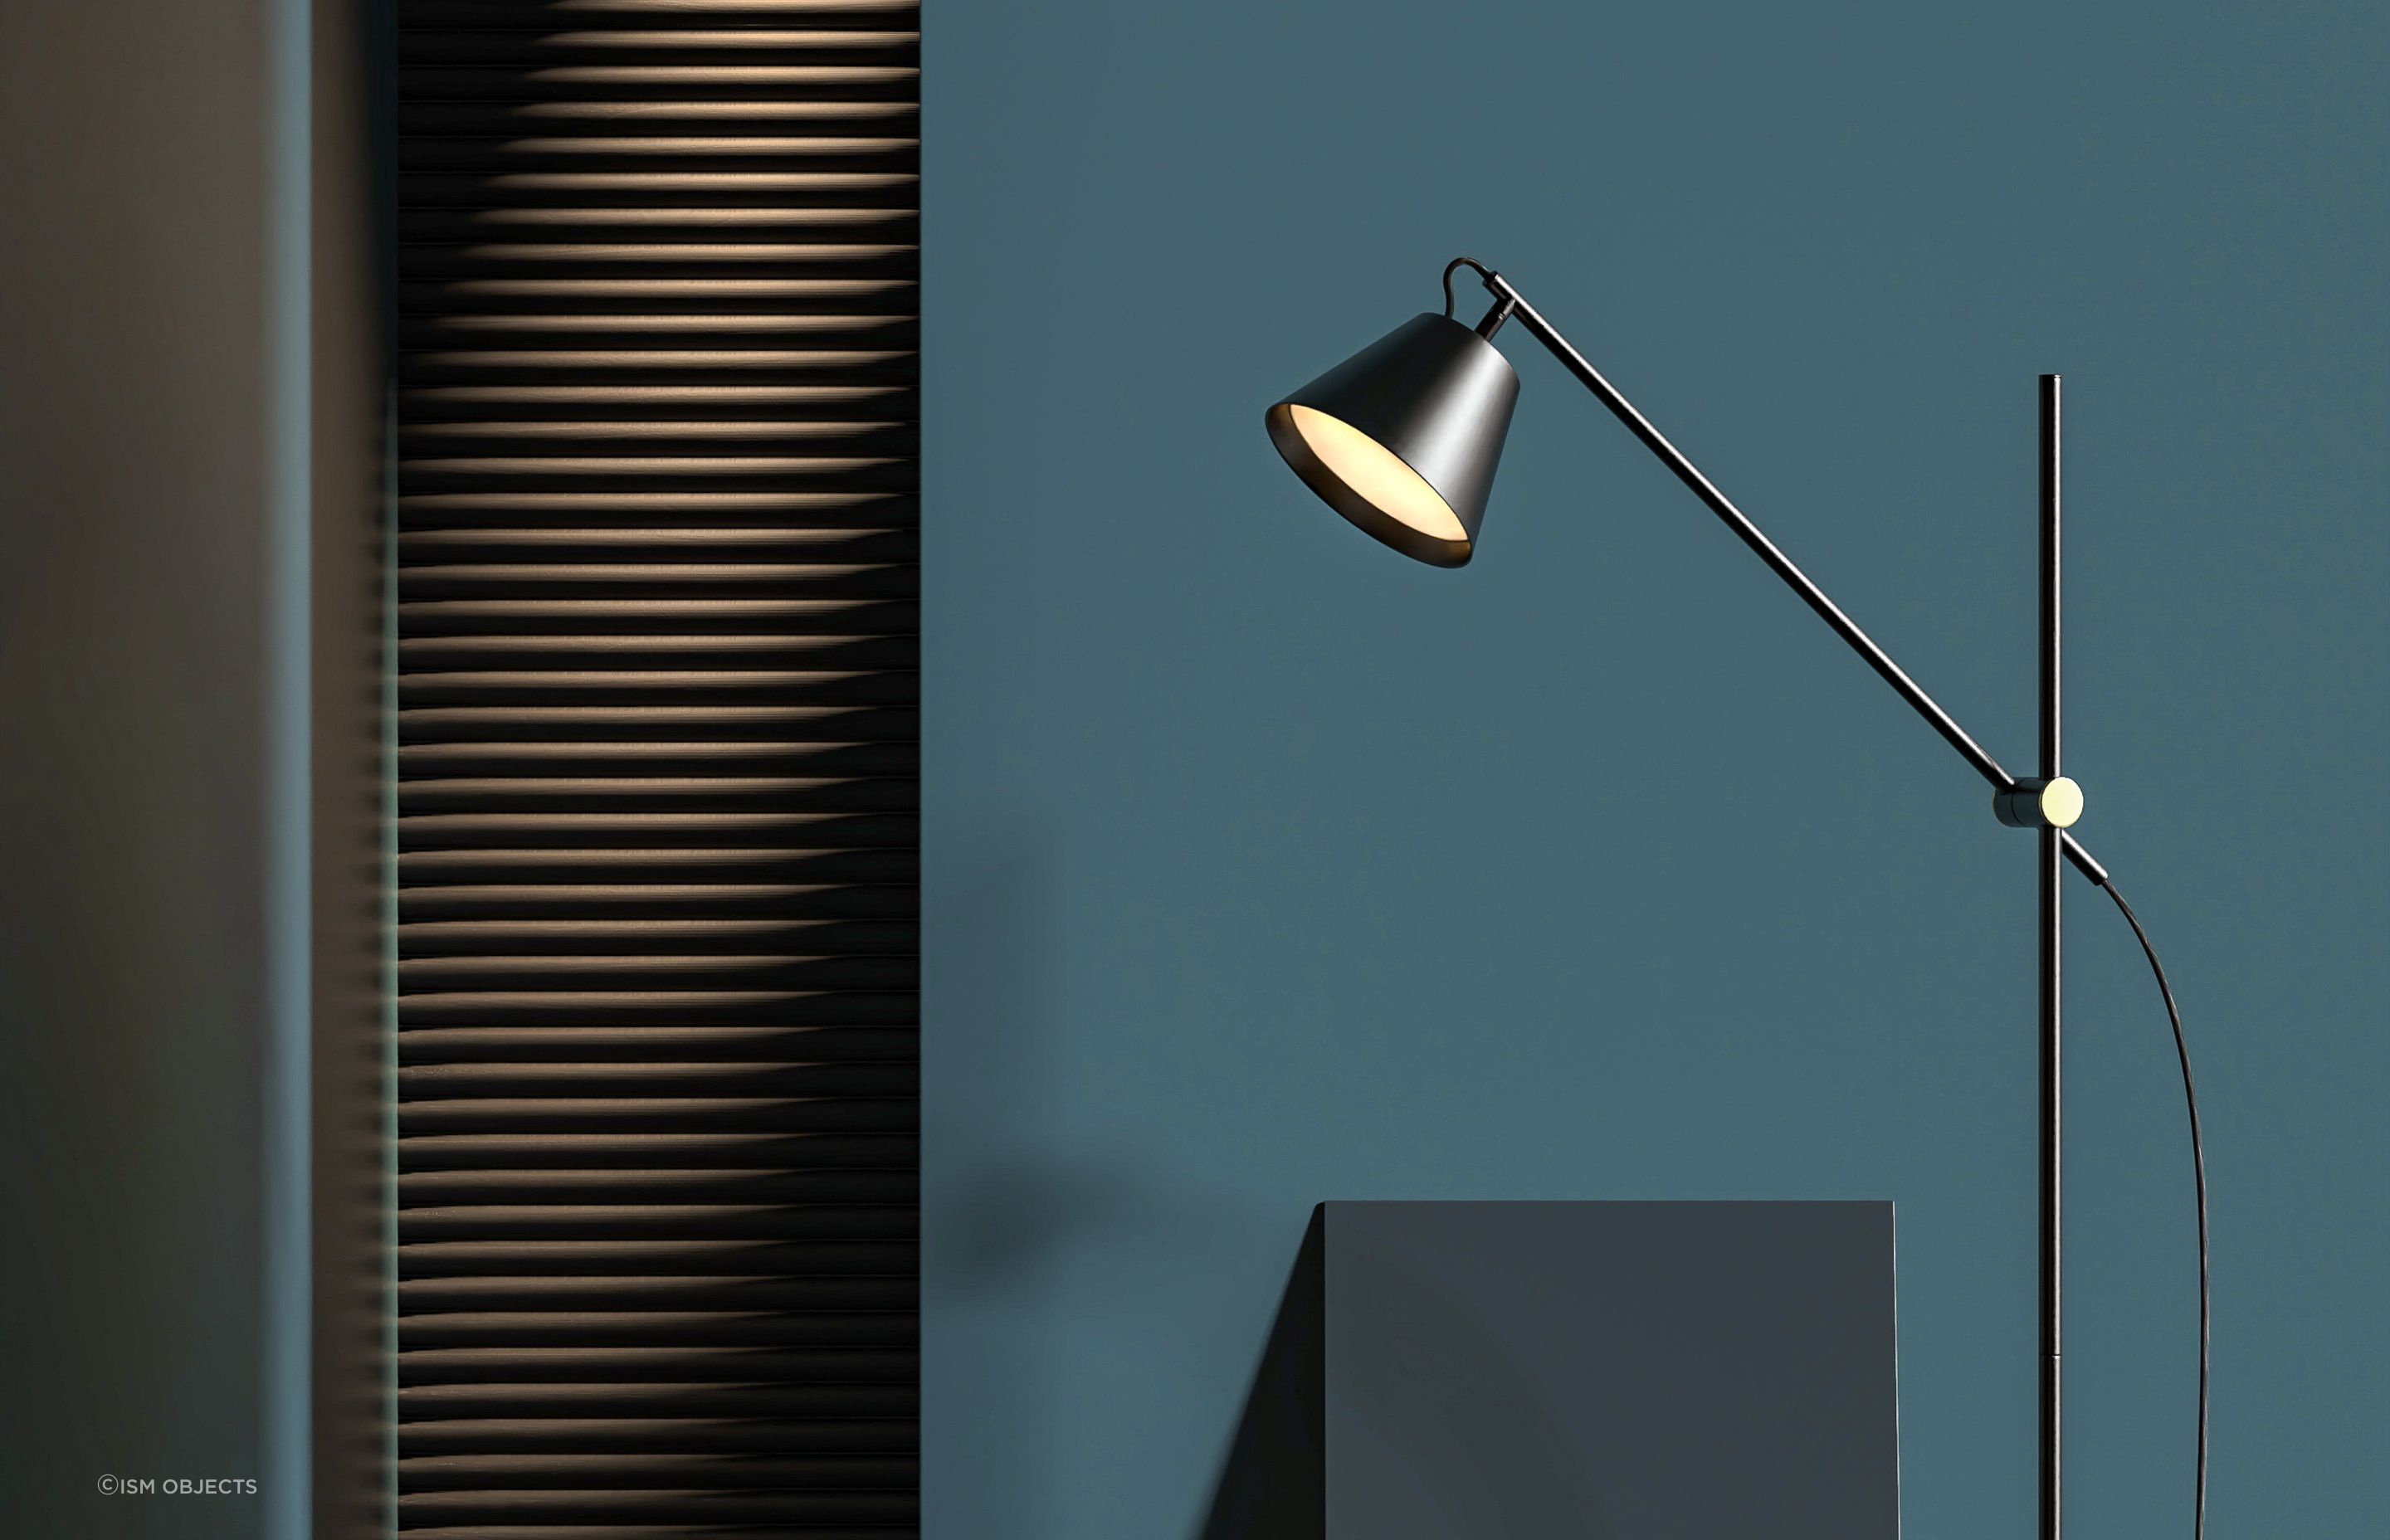 The Studio 8 Floor Lamp is an optimal task lighting solution, suitable for a living space or bedroom.